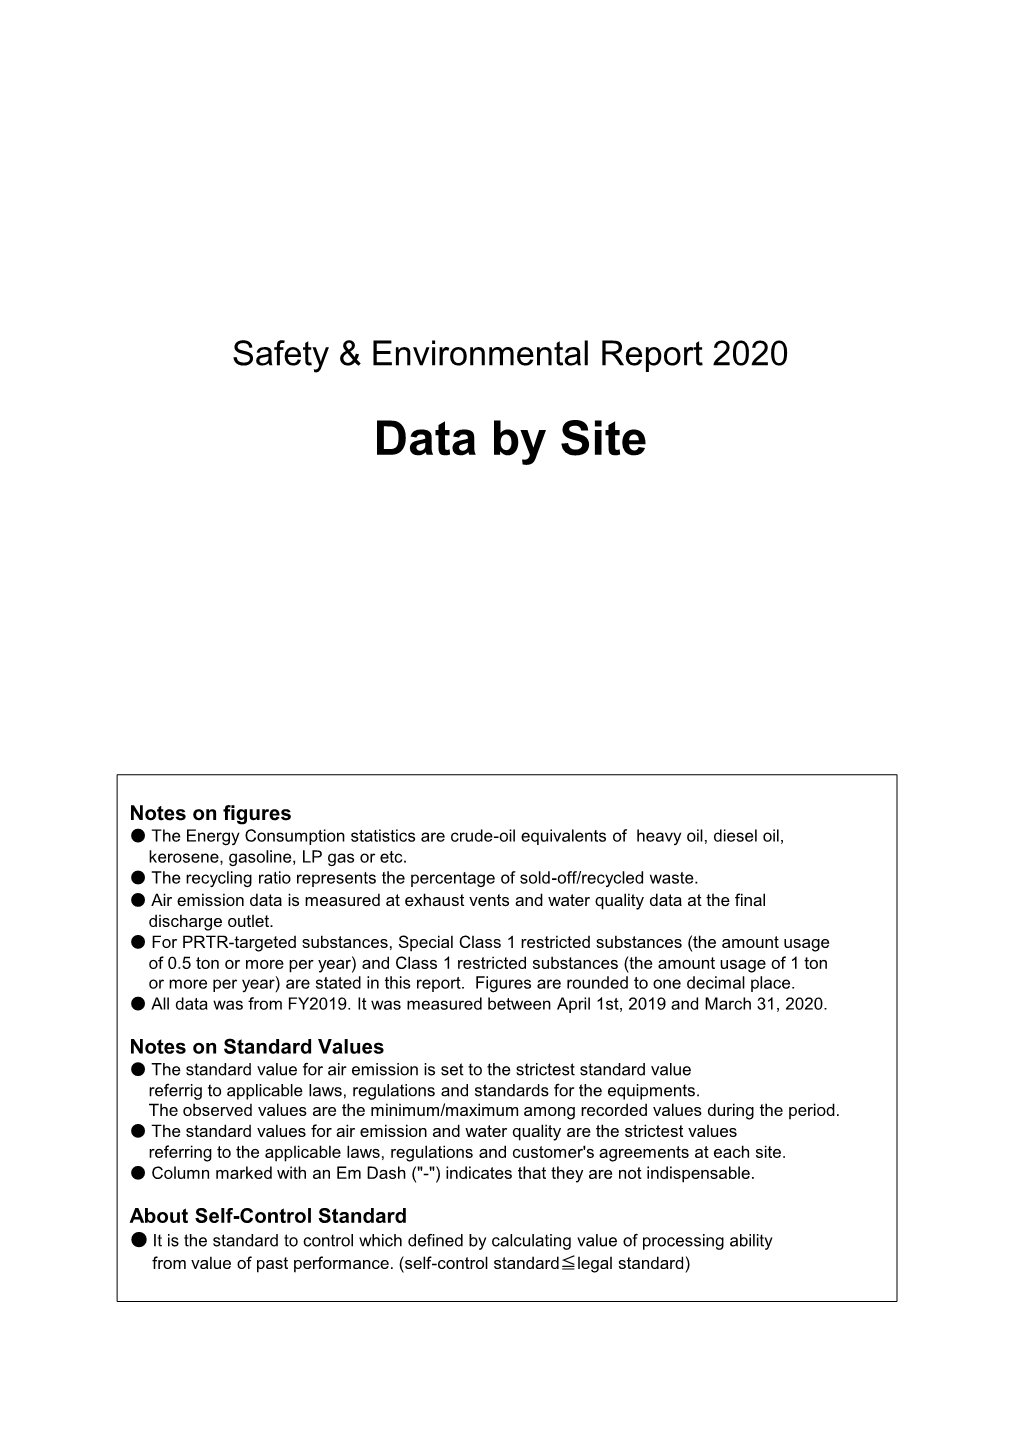 Safety & Environmental Report, Data by Site